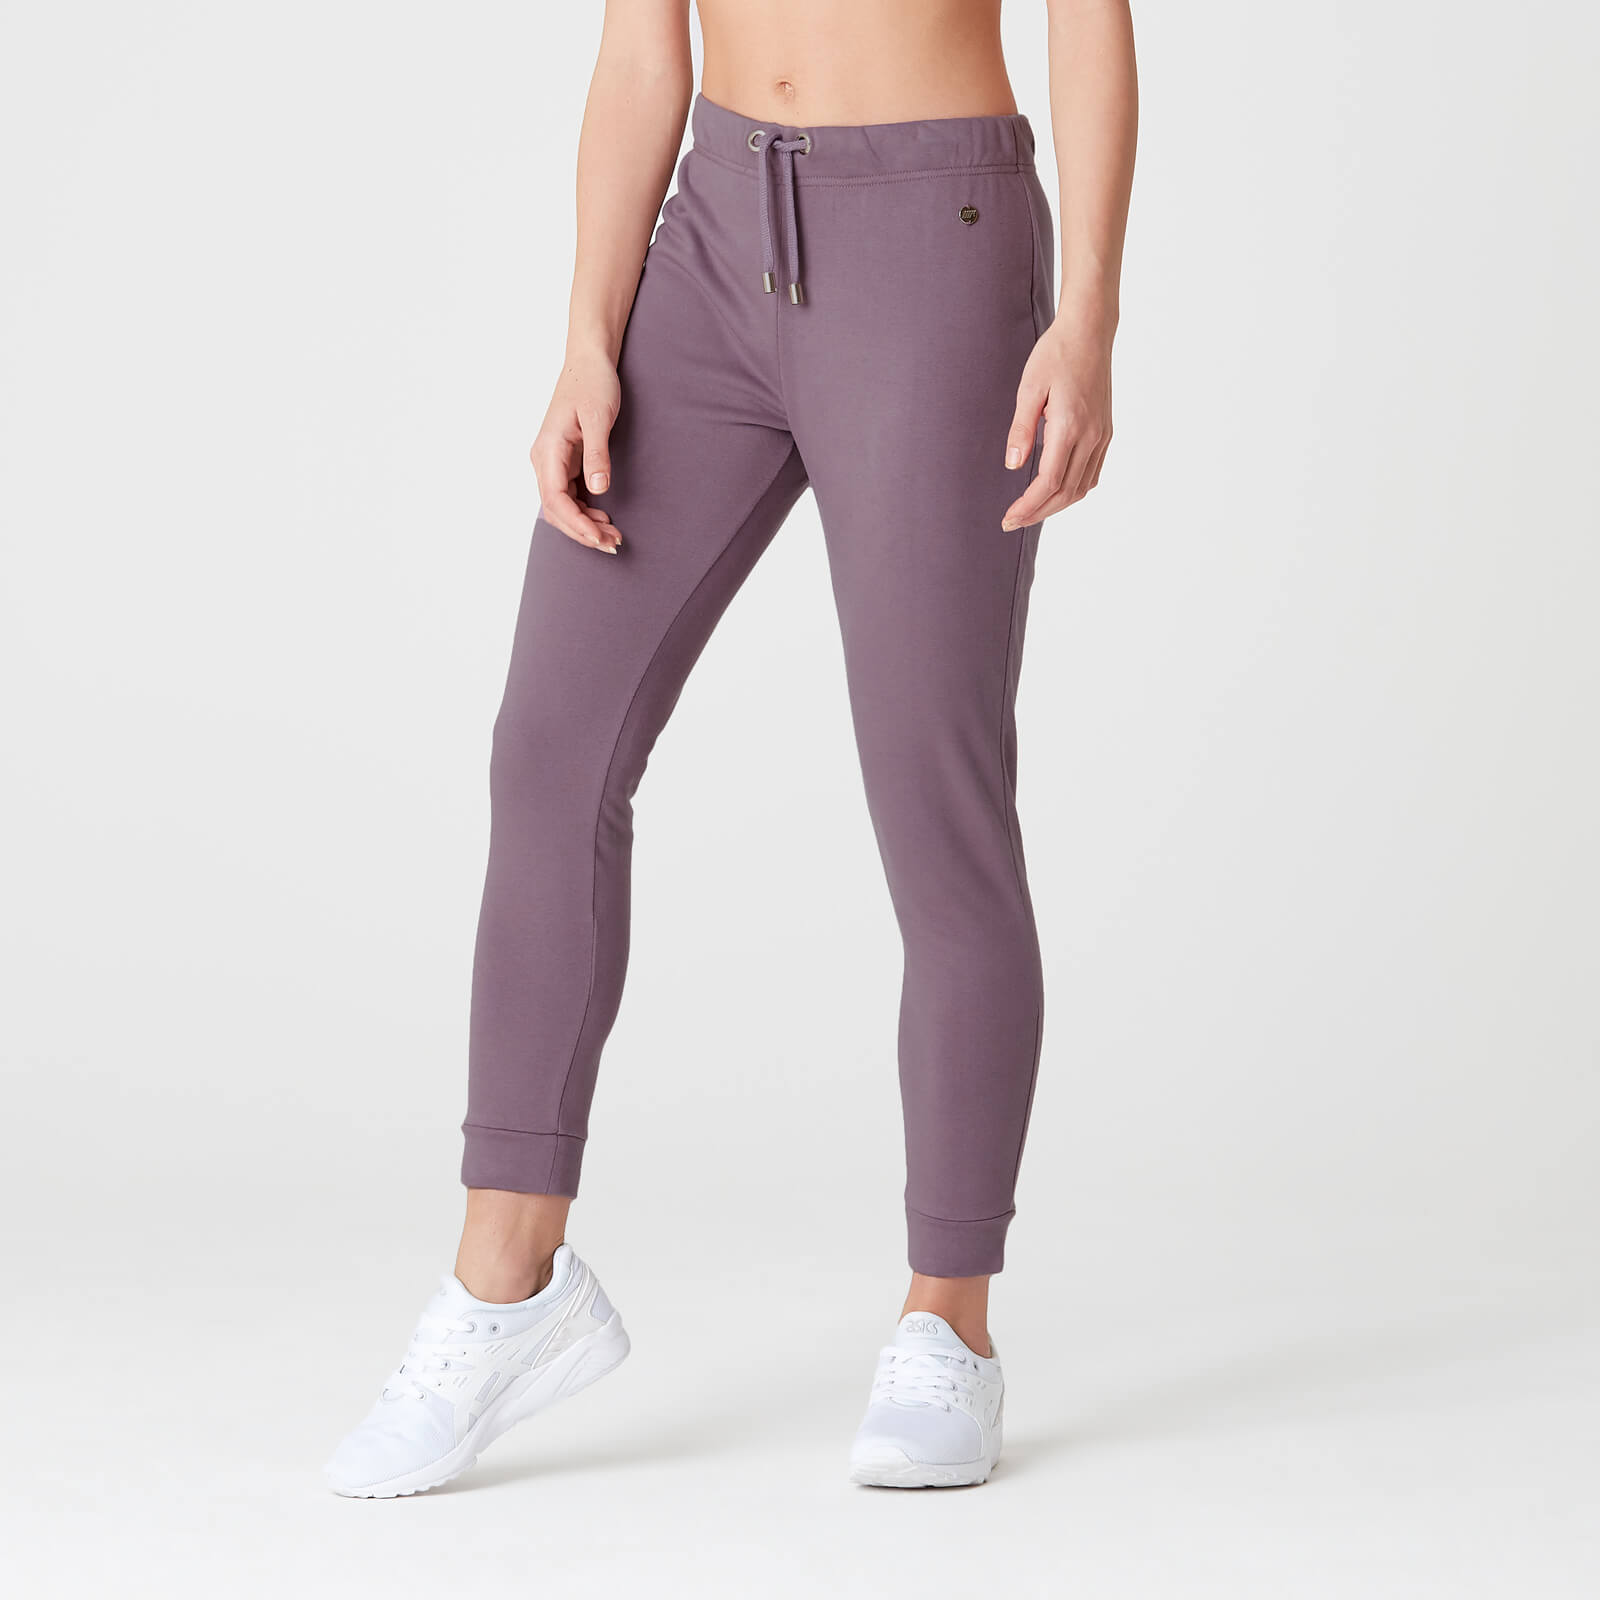 Myprotein Luxe Lounge Jogger - Mauve - XS